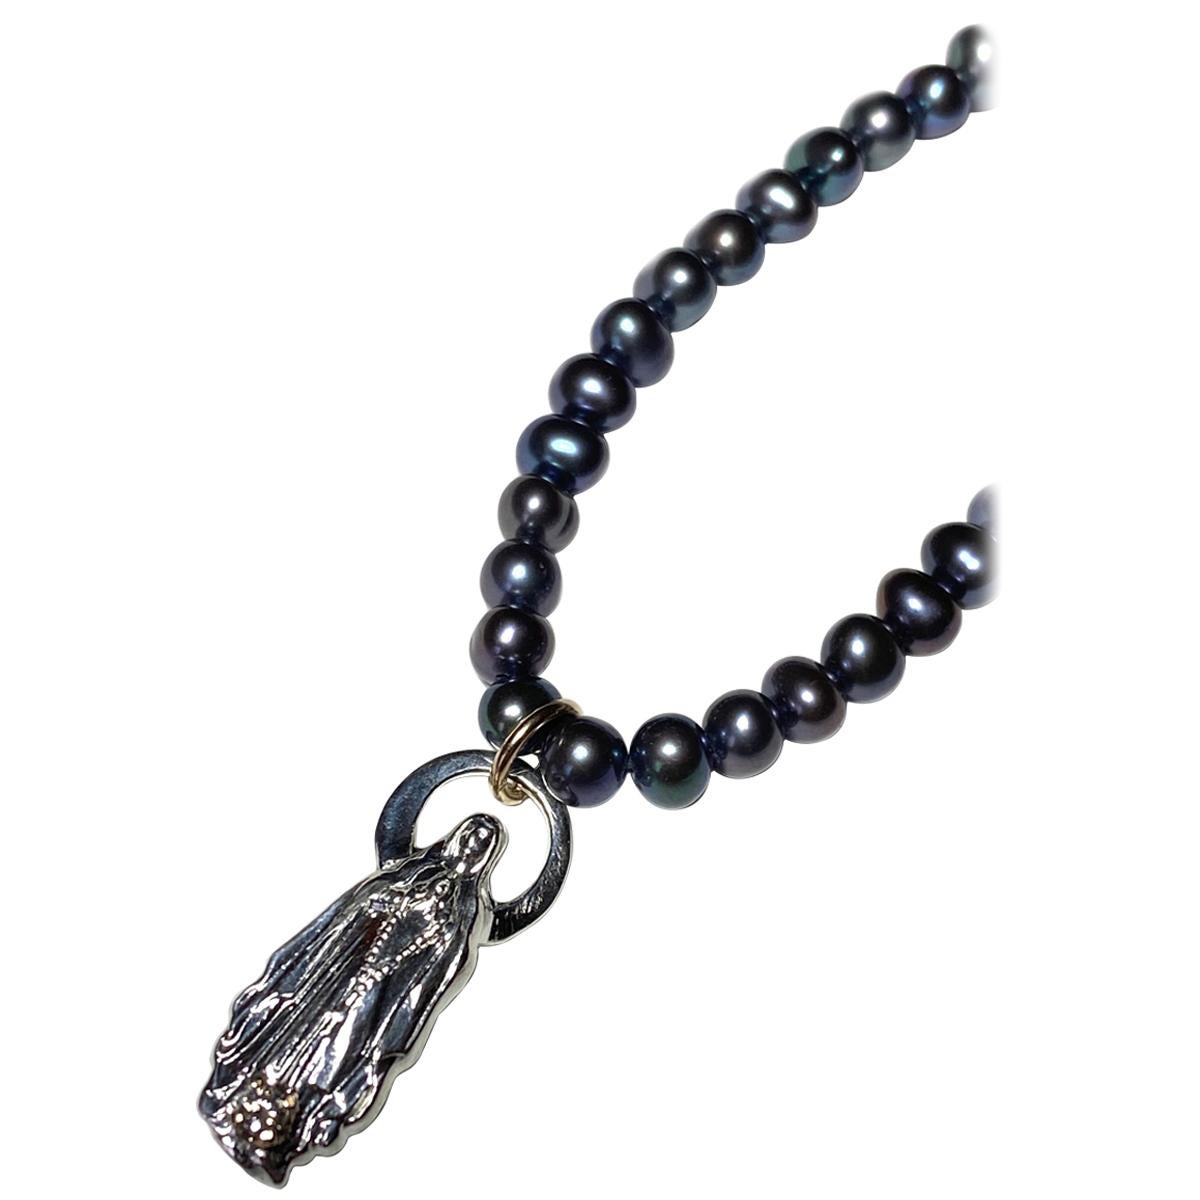 White Diamond Black Pearl Bead Necklace Virgin Mary Medal Pendant J Dauphin

Exclusive piece with Virgin Mary pendant and an White Diamond set in a gold prong on a Silver Figurine pendant. Bead Necklace is 18' long but can be made shorter or longer